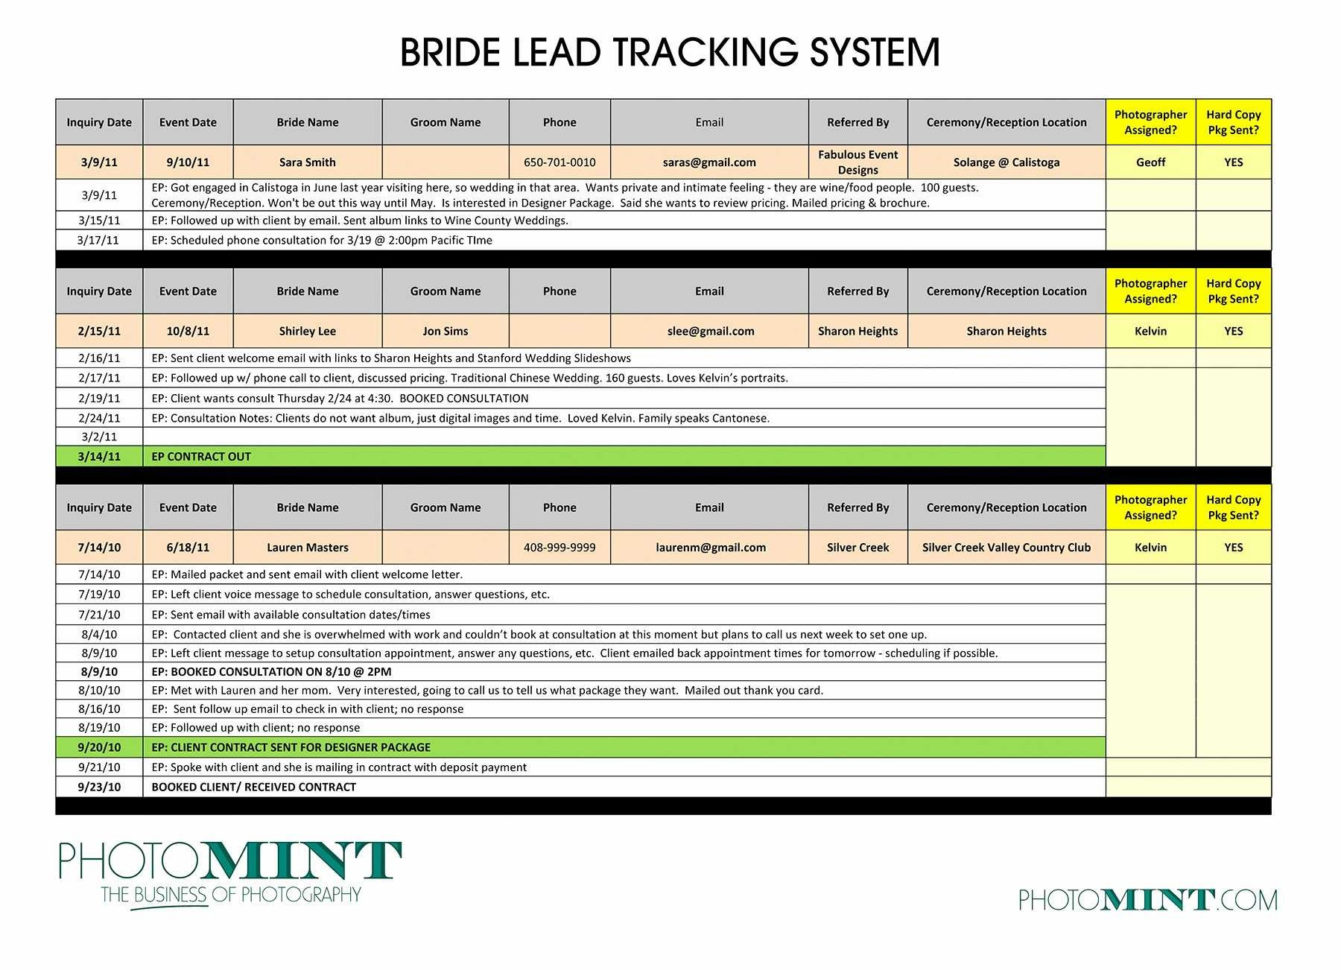 sales-lead-tracking-excel-template-lead-tracking-spreadsheet-real-with-real-estate-sales